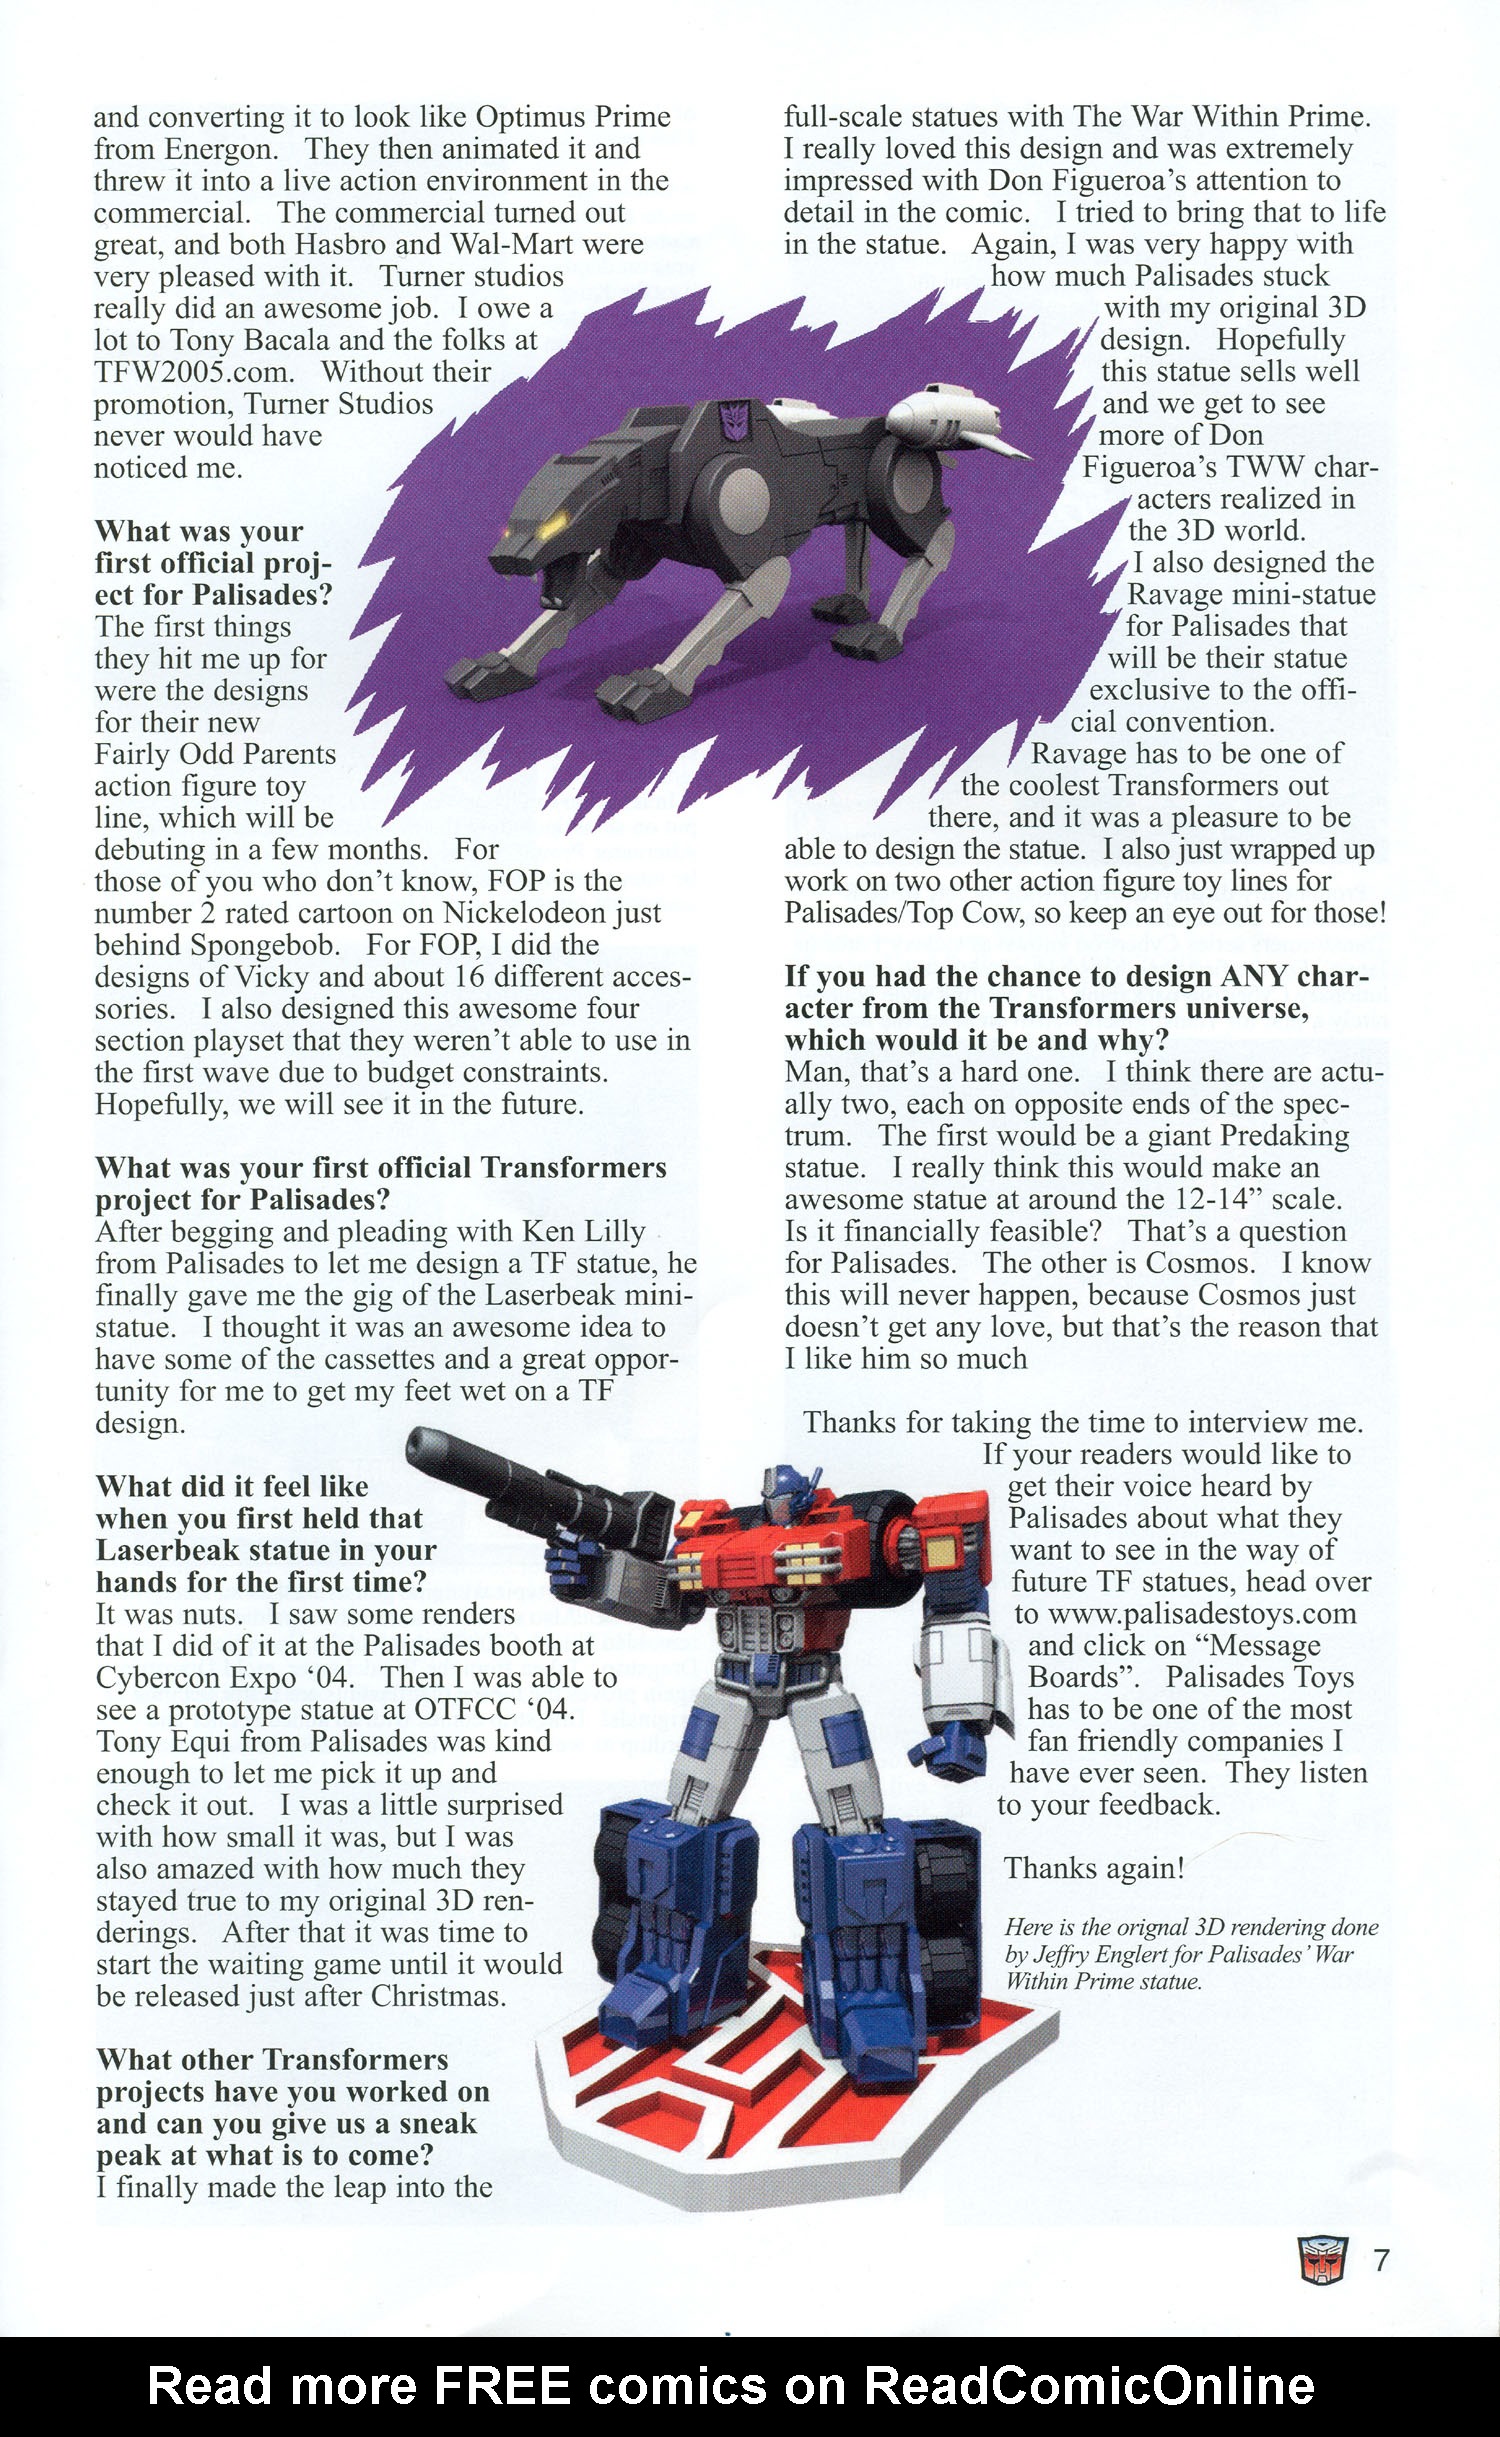 Read online Transformers: Collectors' Club comic -  Issue #2 - 7